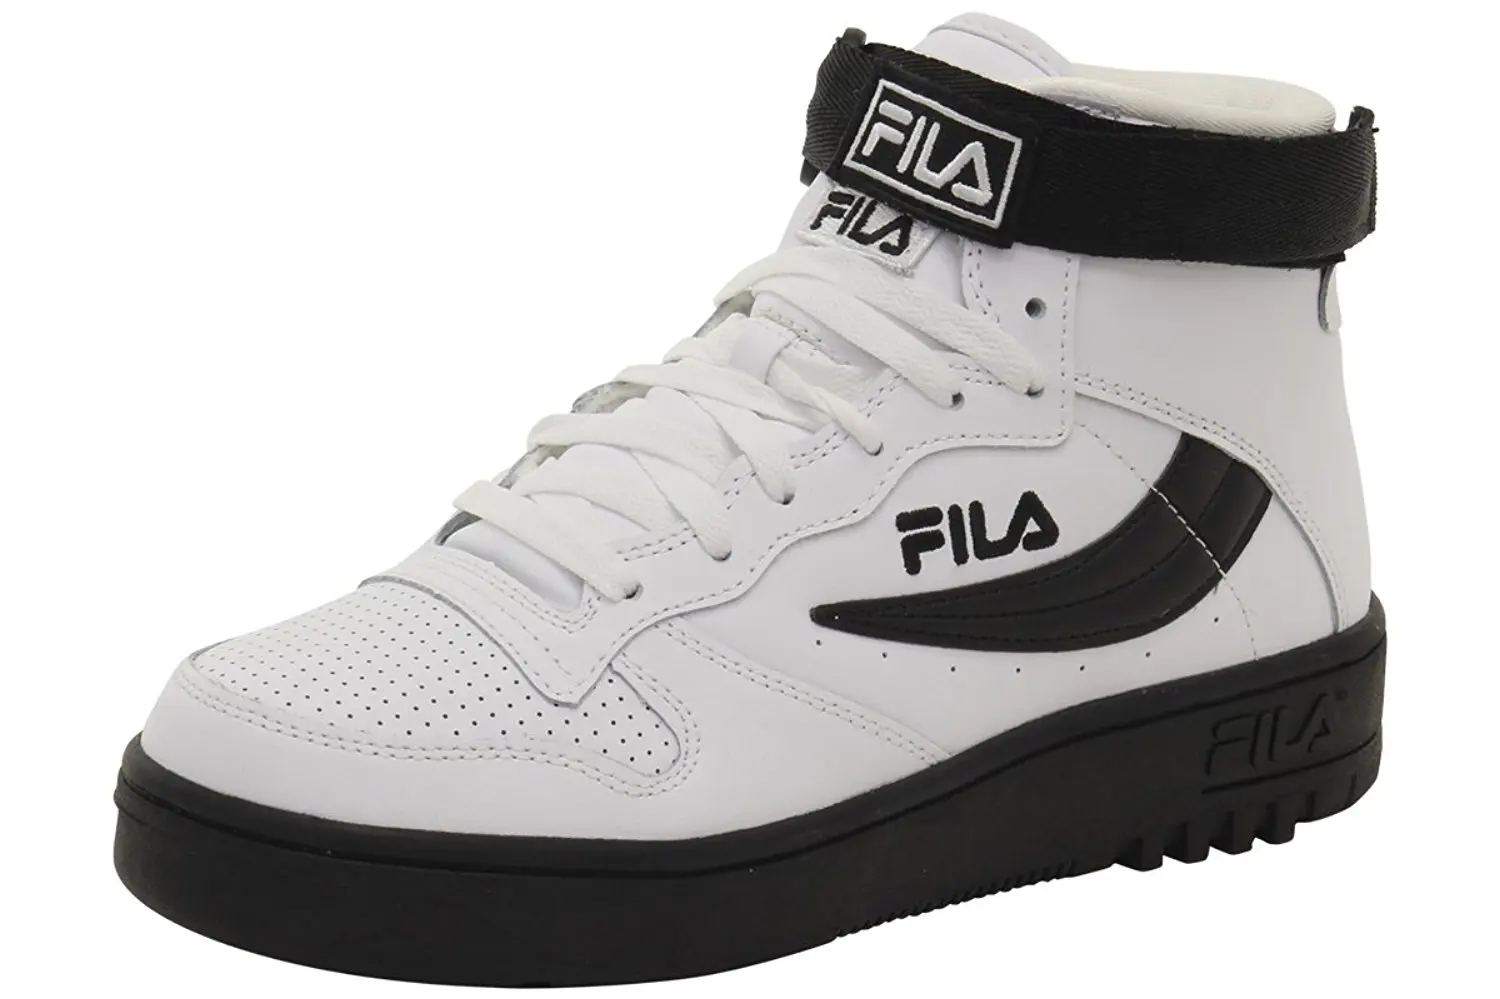 Cheap Fila Sneakers, find Fila Sneakers deals on line at 0